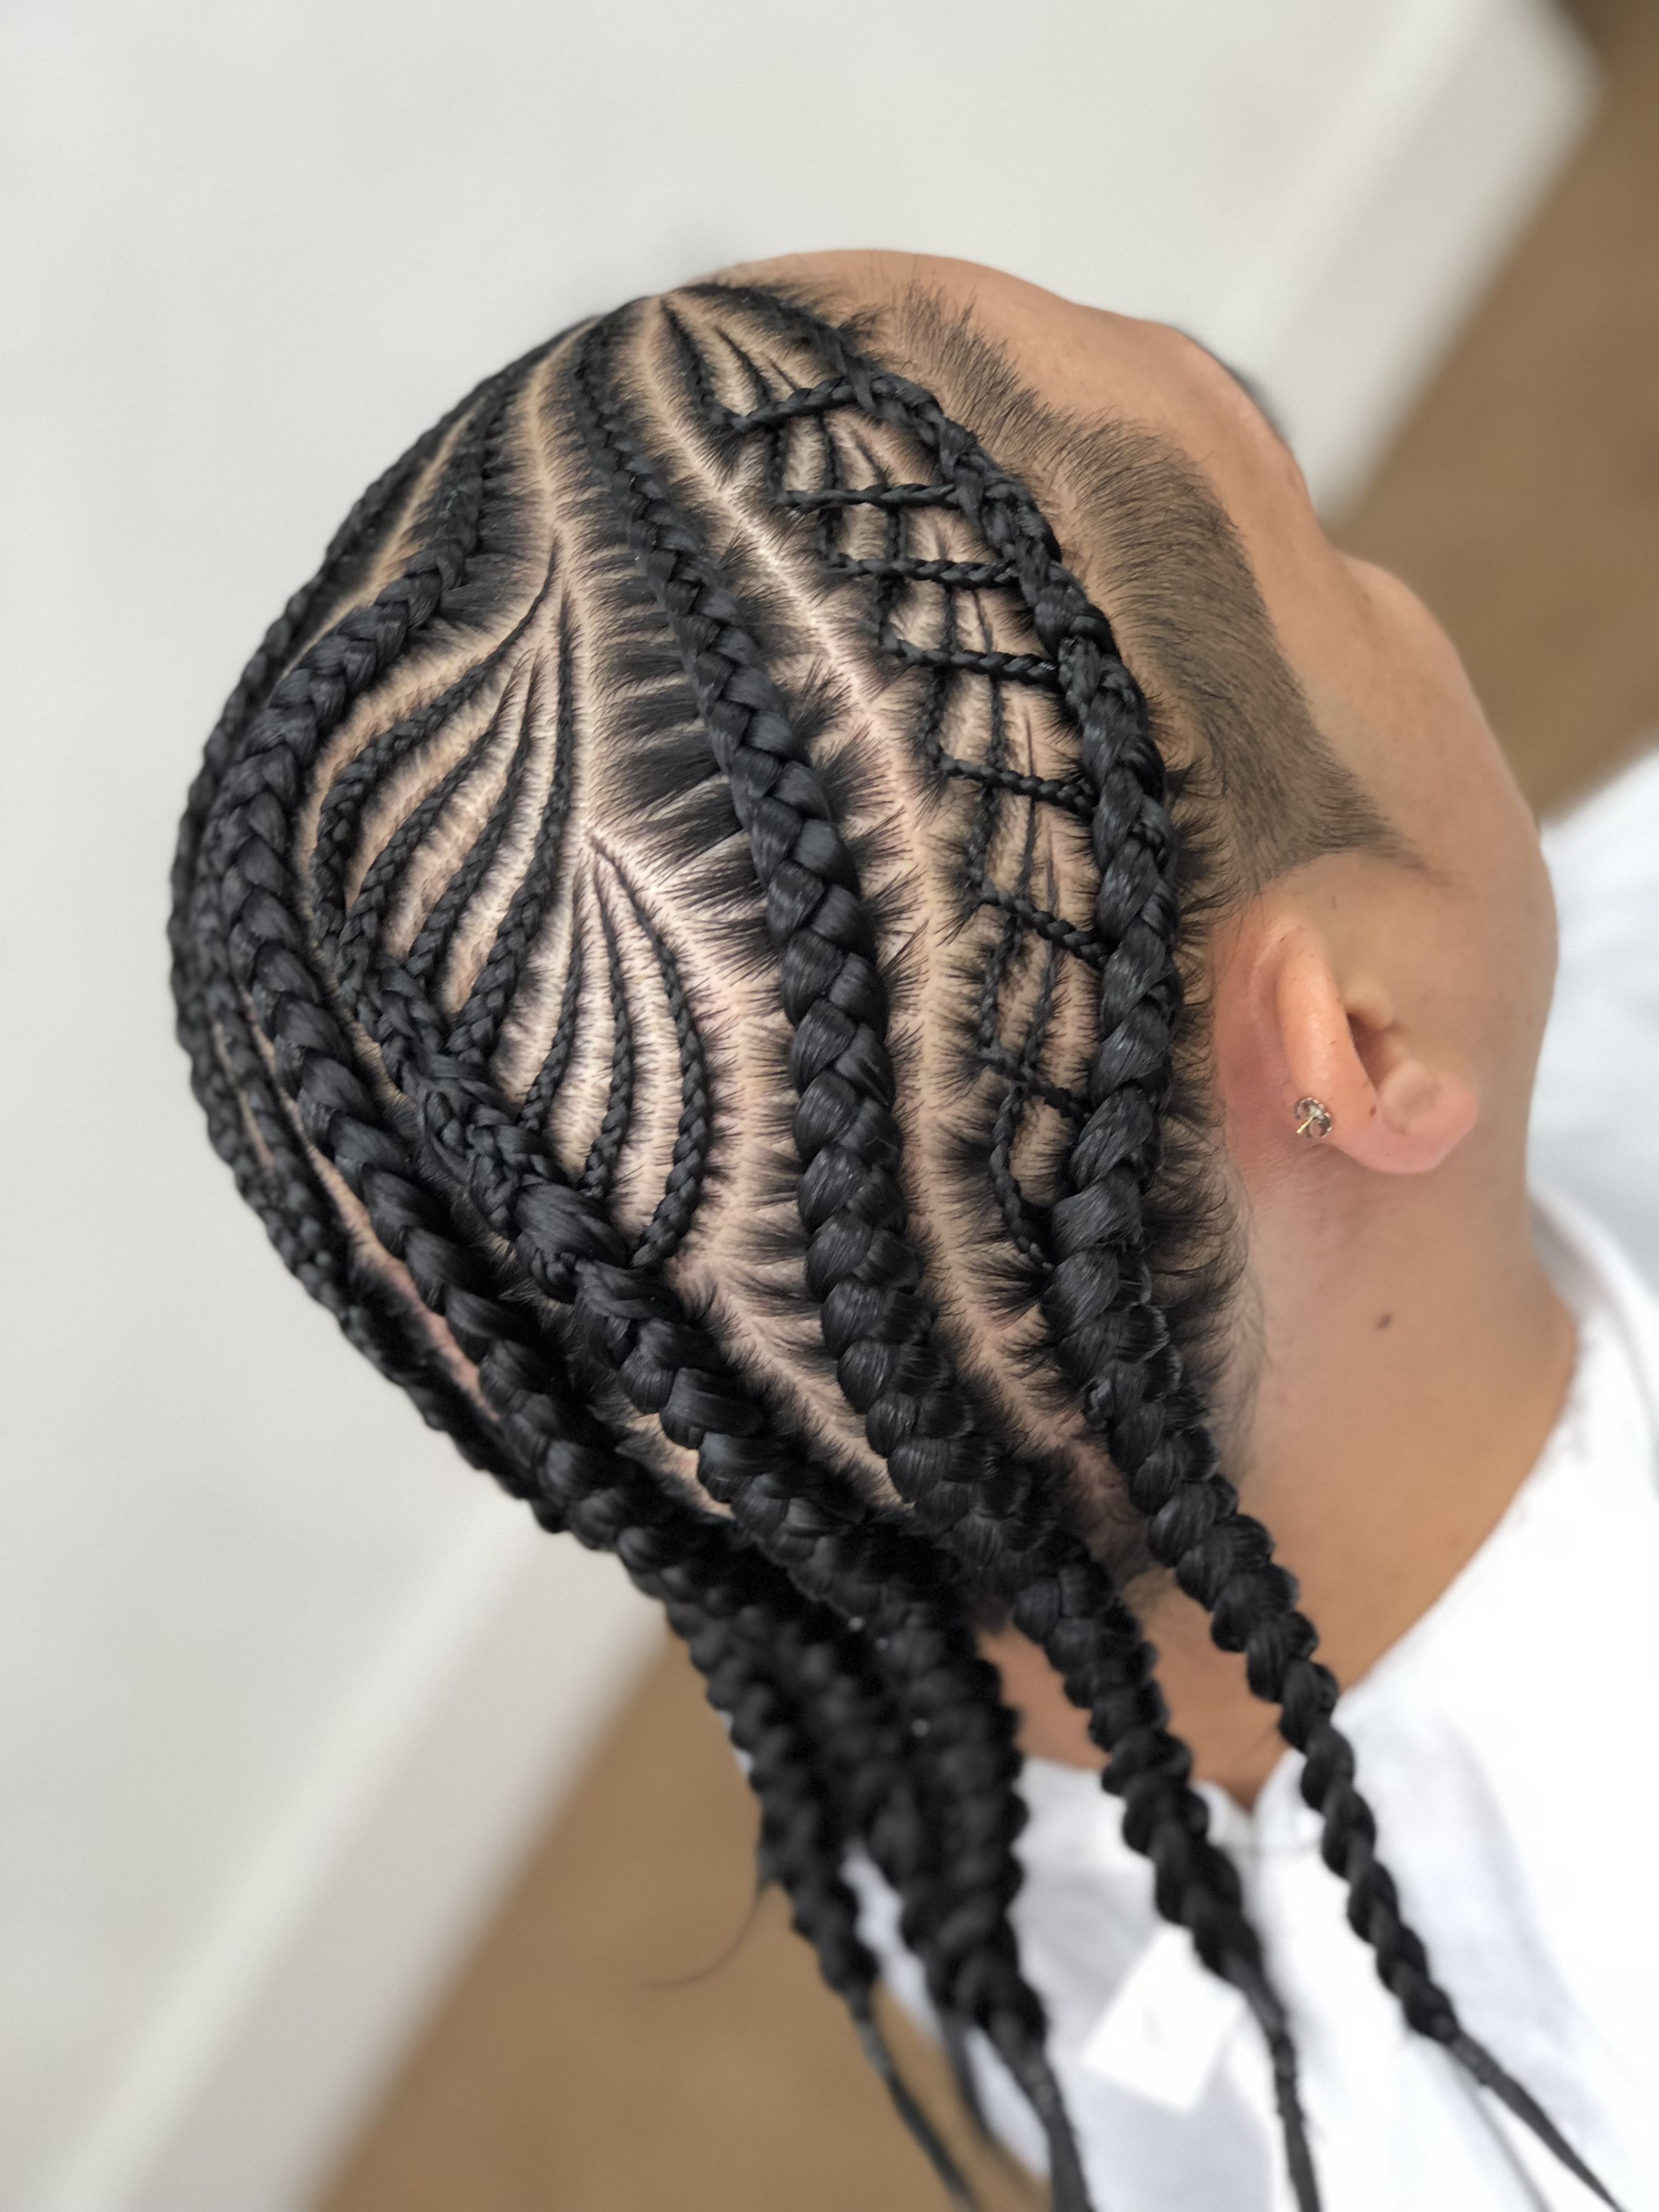 Braids Intended For Well Known Full Scalp Patterned Side Braided Hairstyles (View 9 of 20)